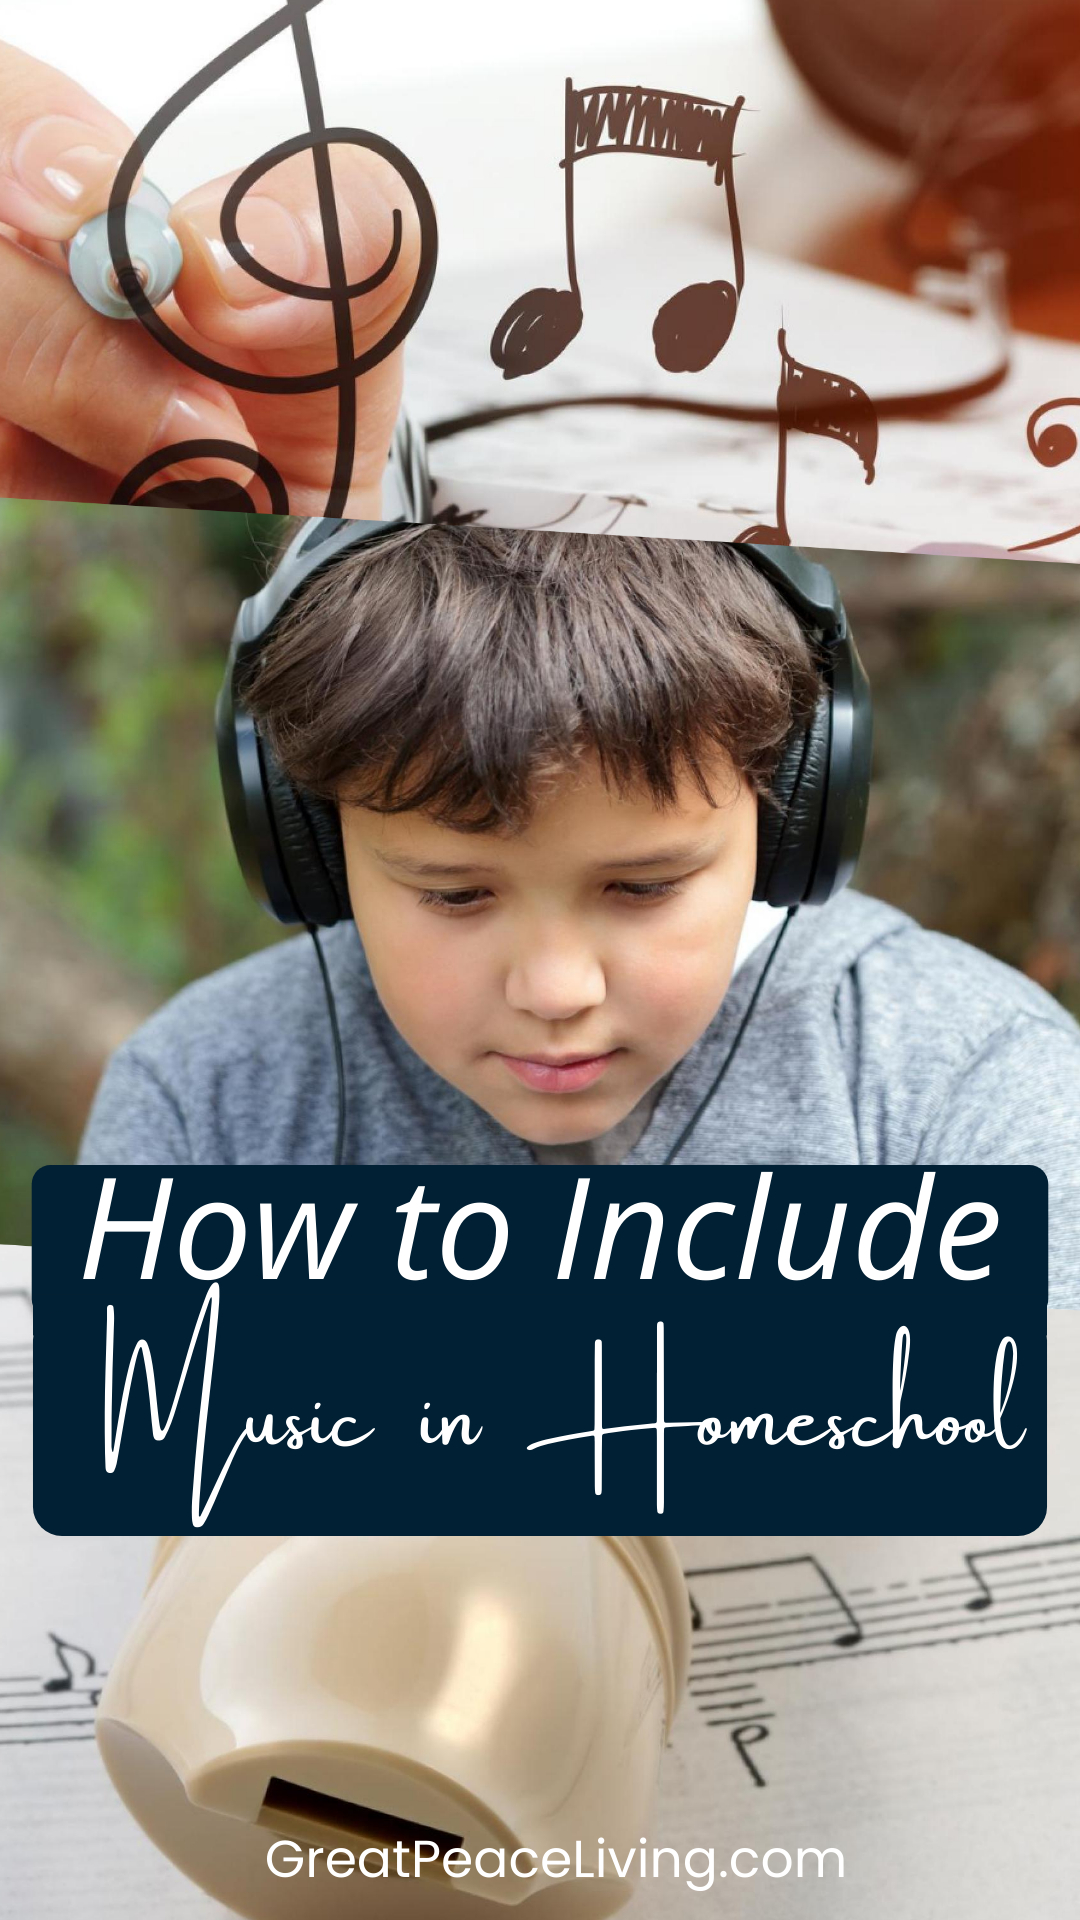 How to Include Music in Homeschool